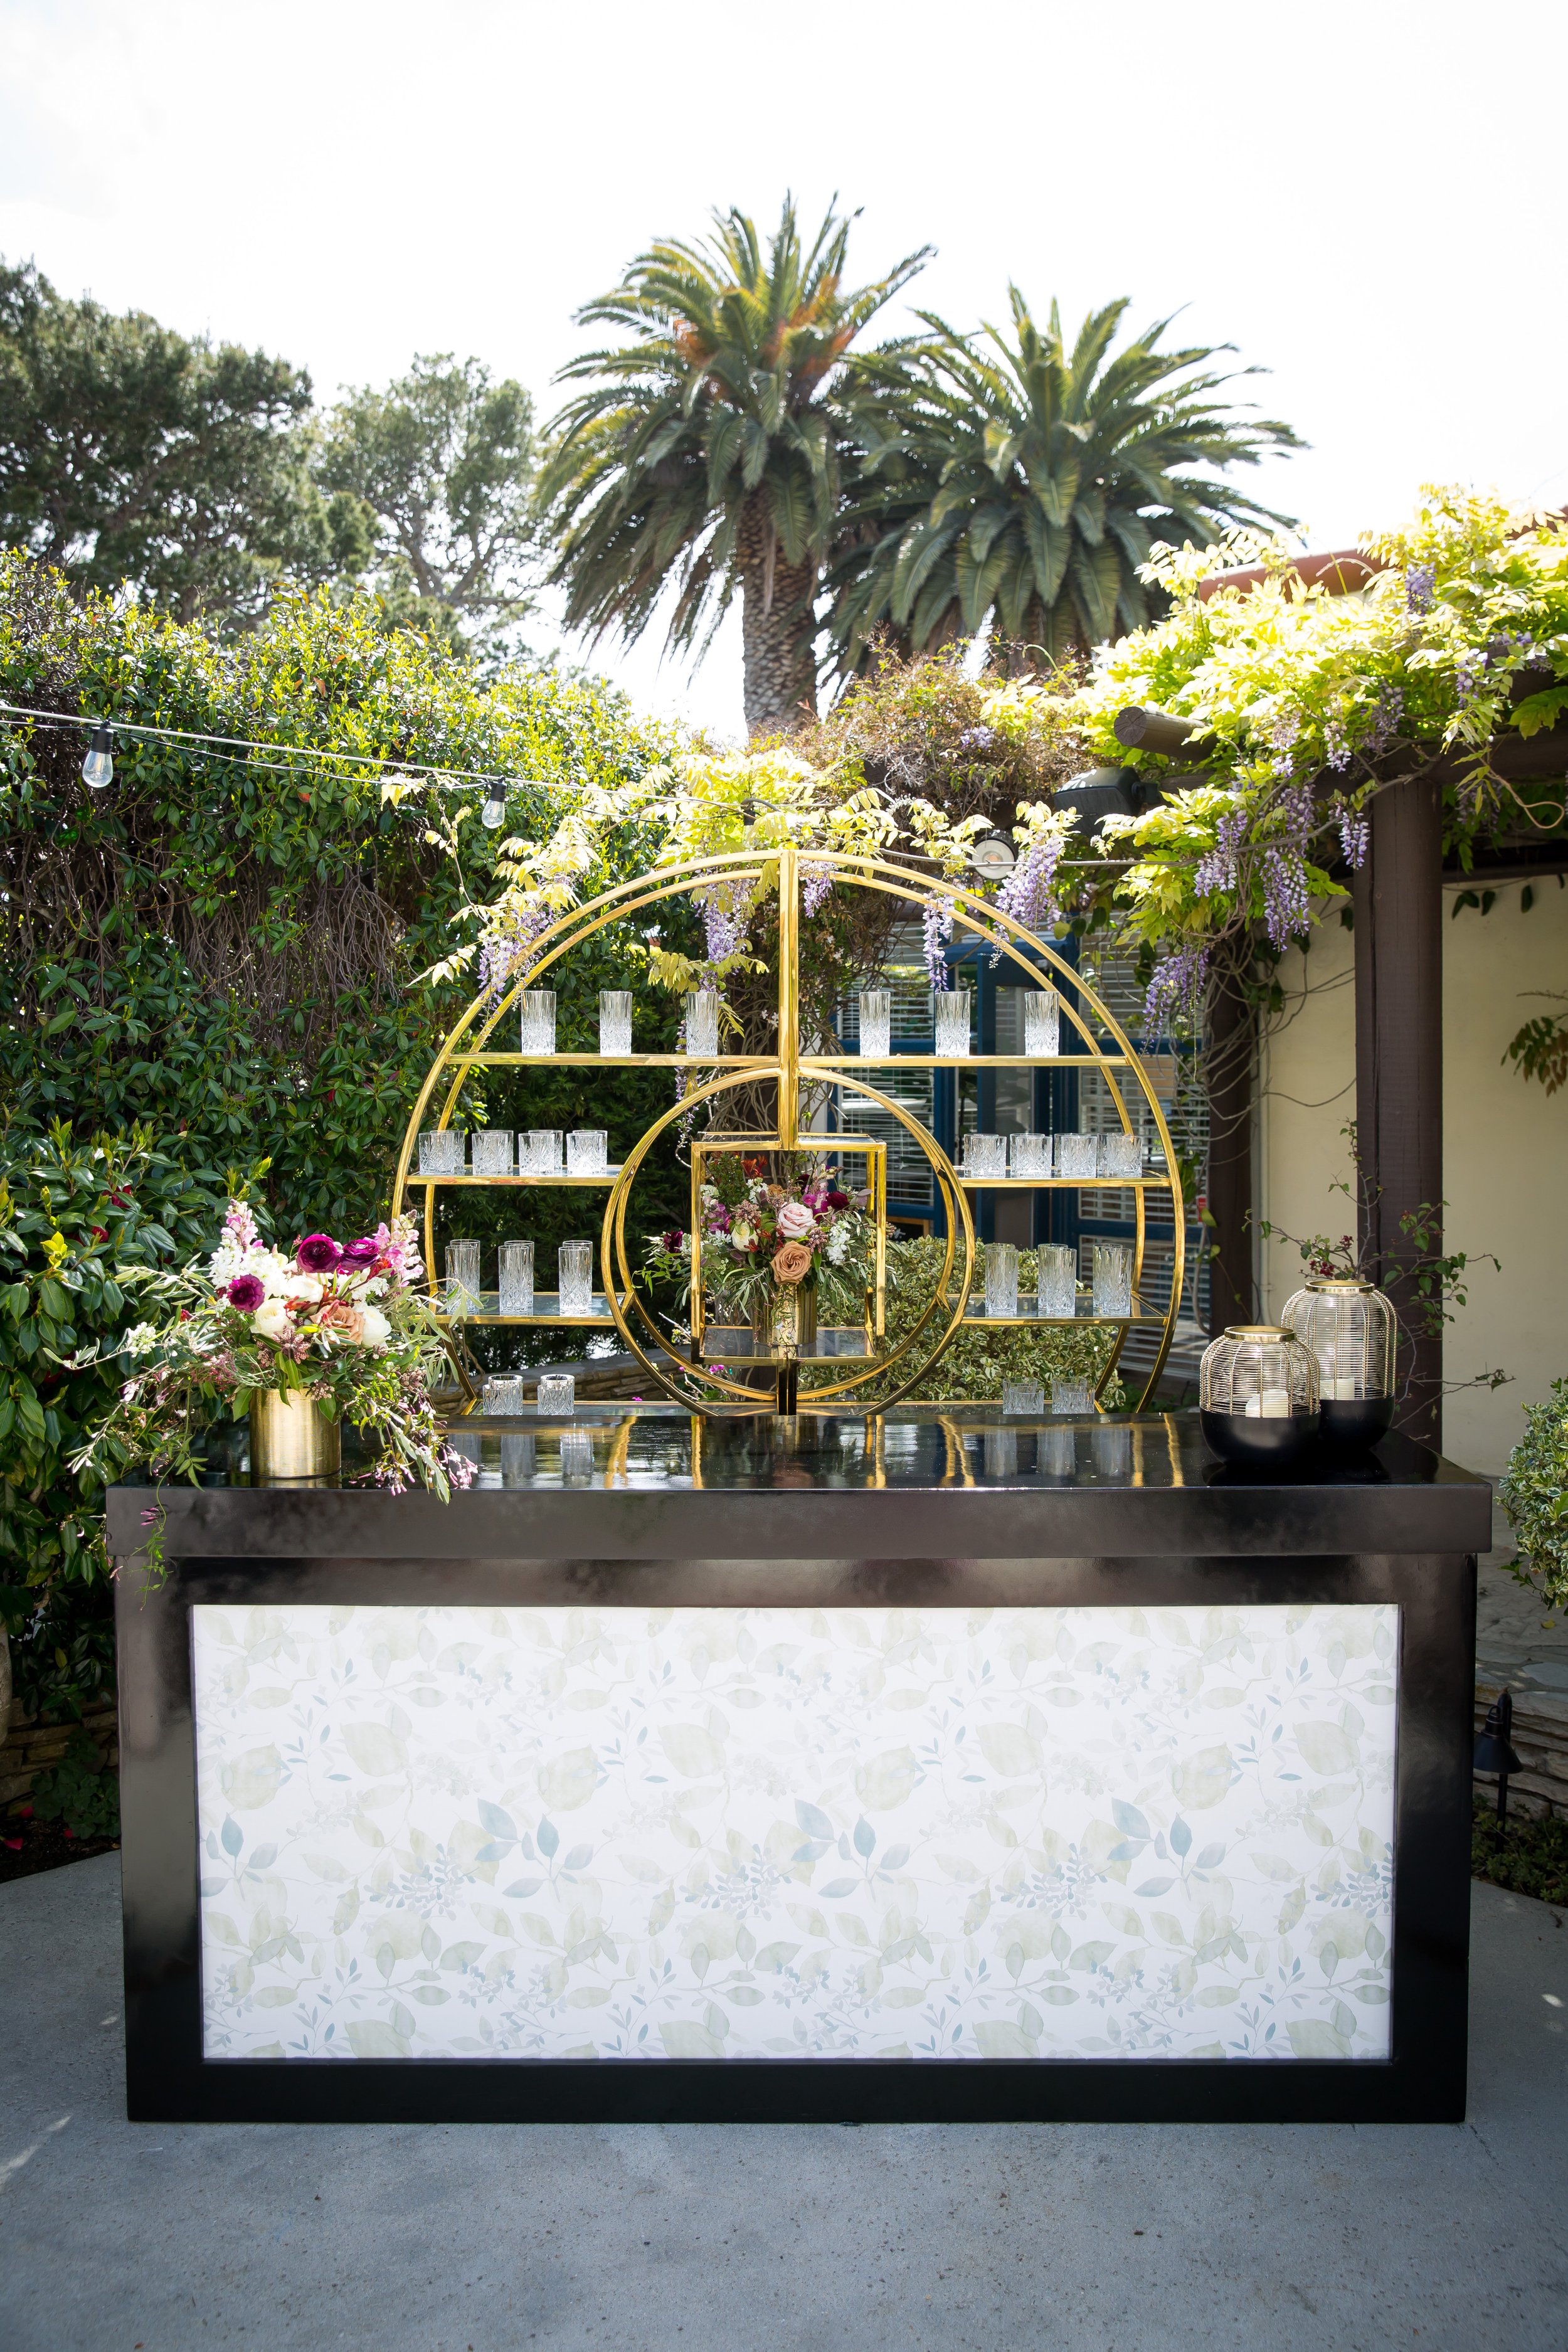 www.santabarbarawedding.com | Bright Event Rentals | Some Enchanted Evening | Tablescape Design for Events or Weddings with Black, Gold, and Sage Accents